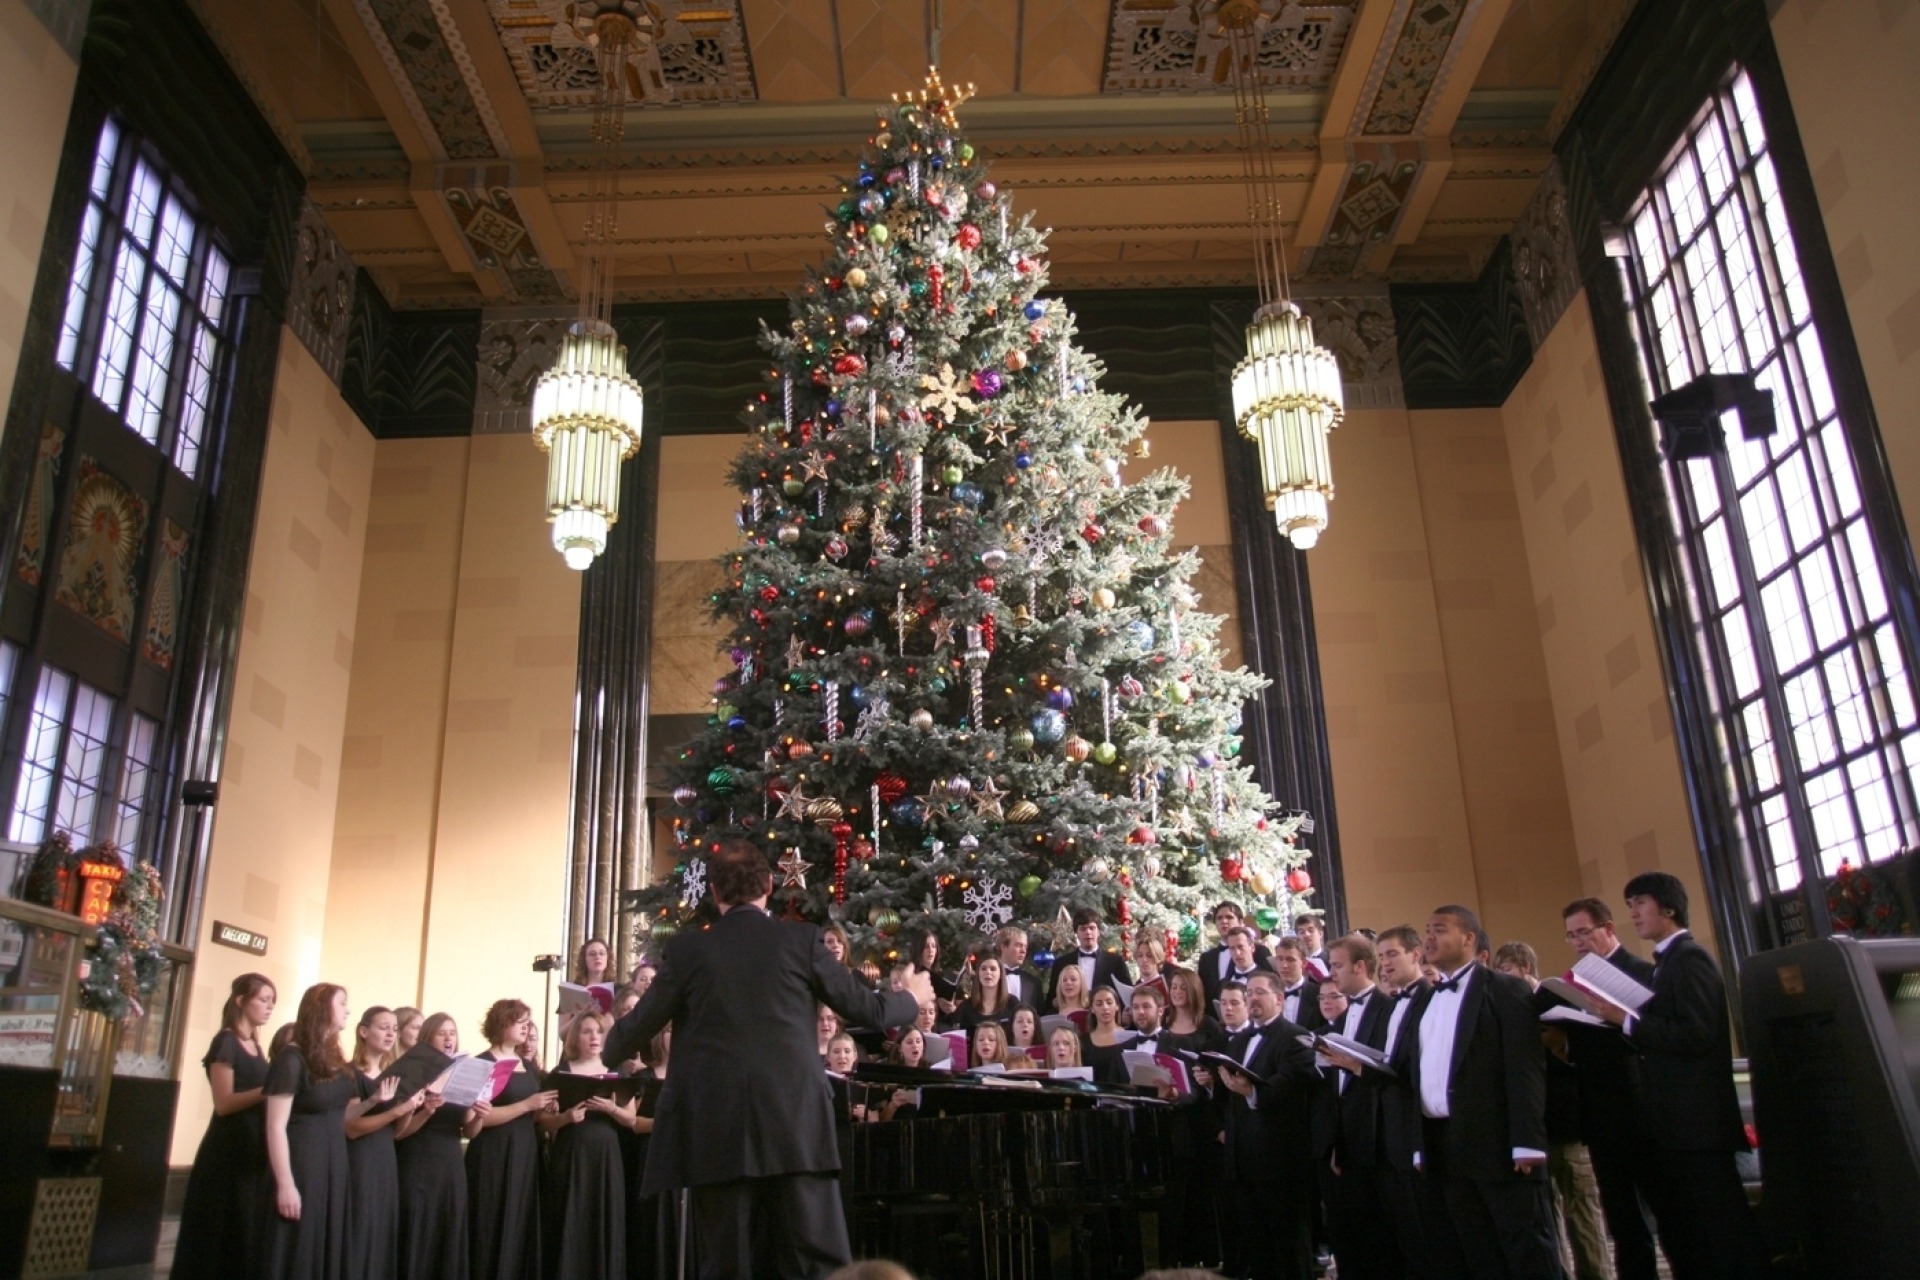 A photo of a choir singing in front of the massive christmas tree at the Durham Museum